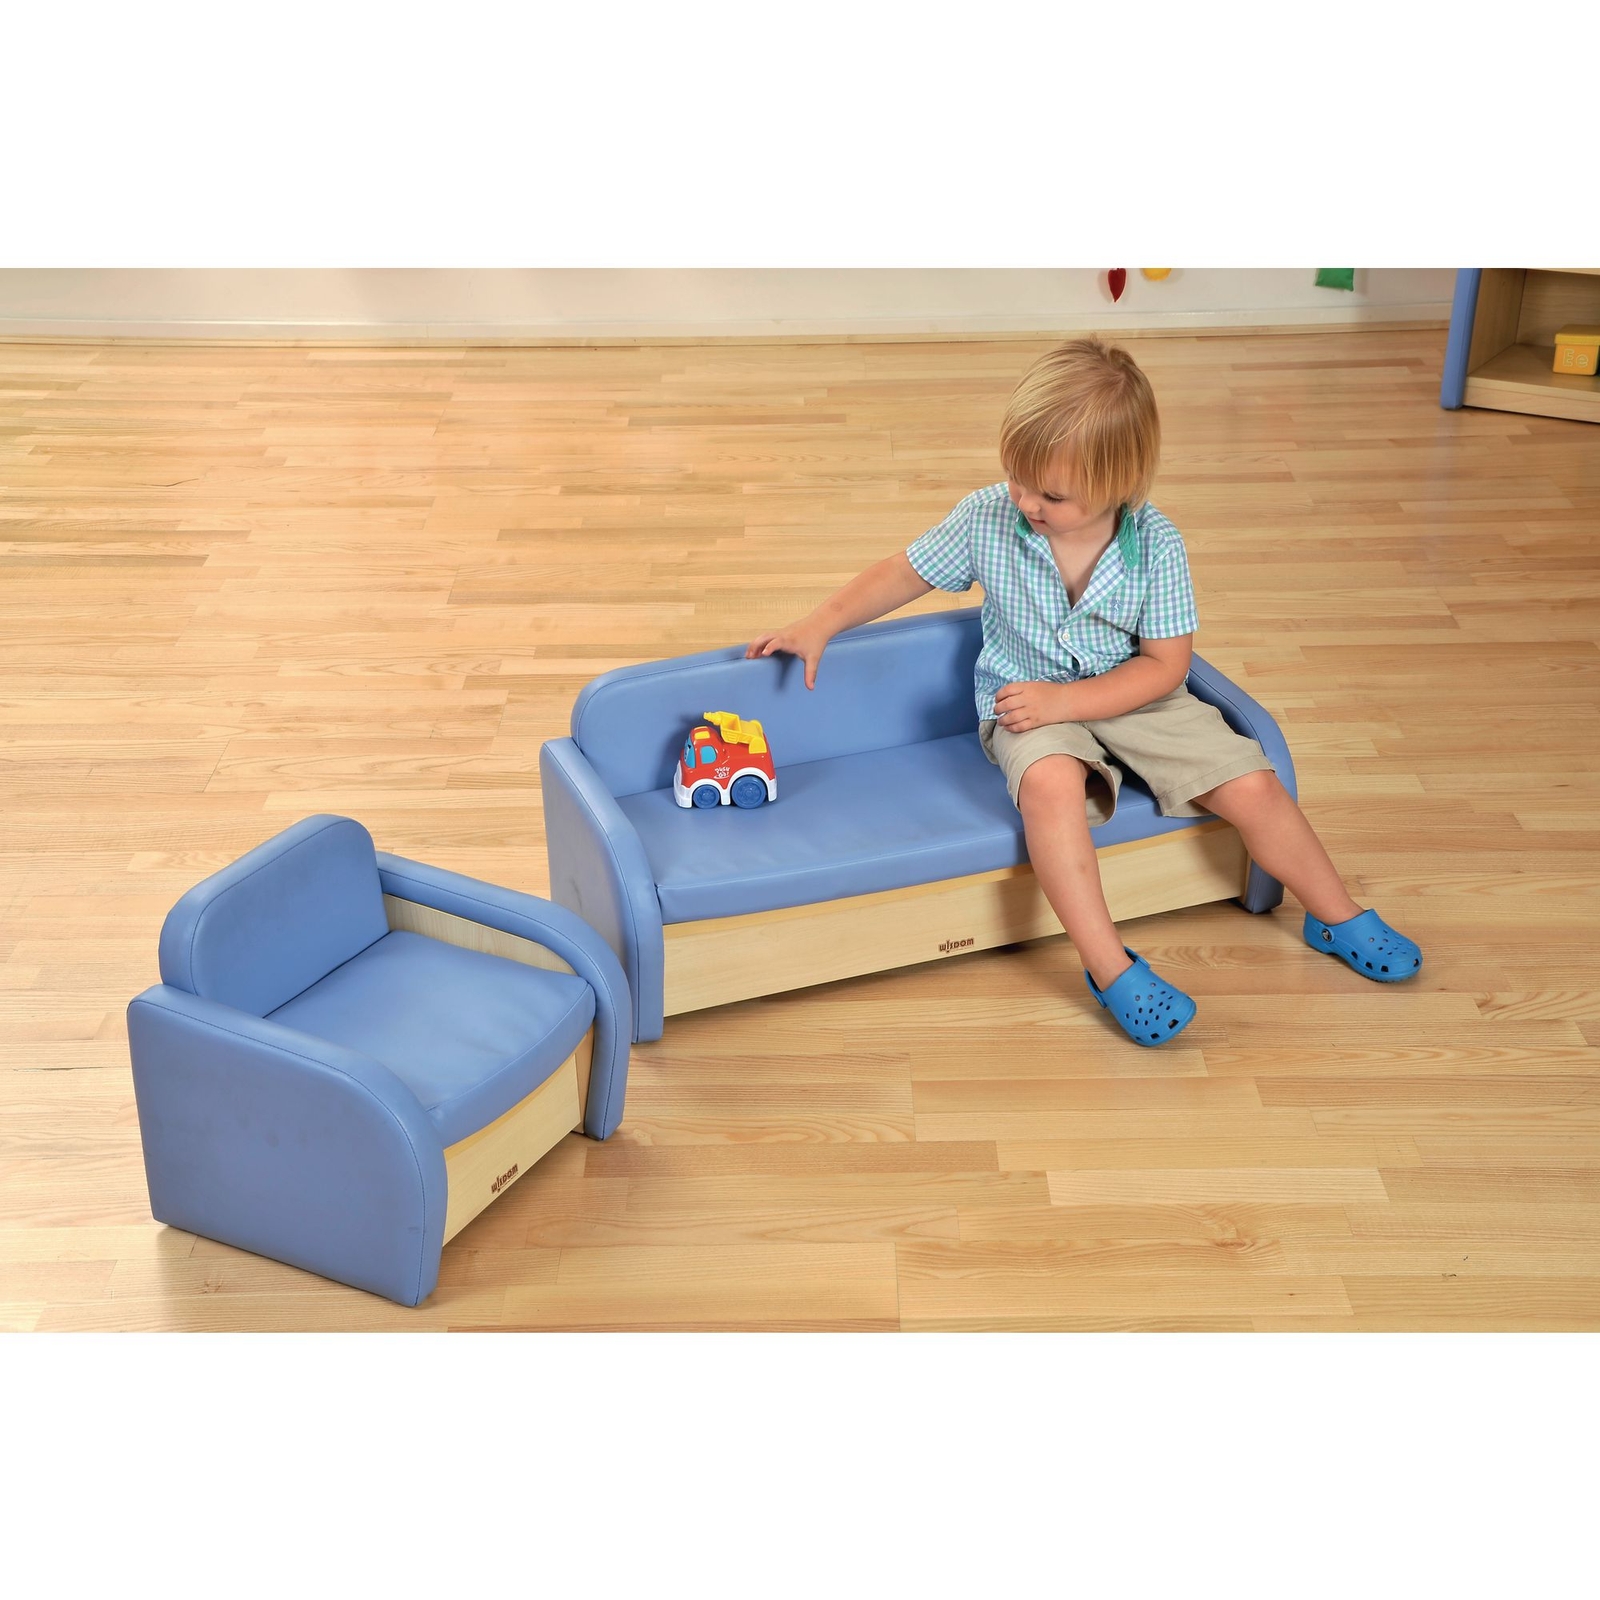 Safespace Toddler Chair